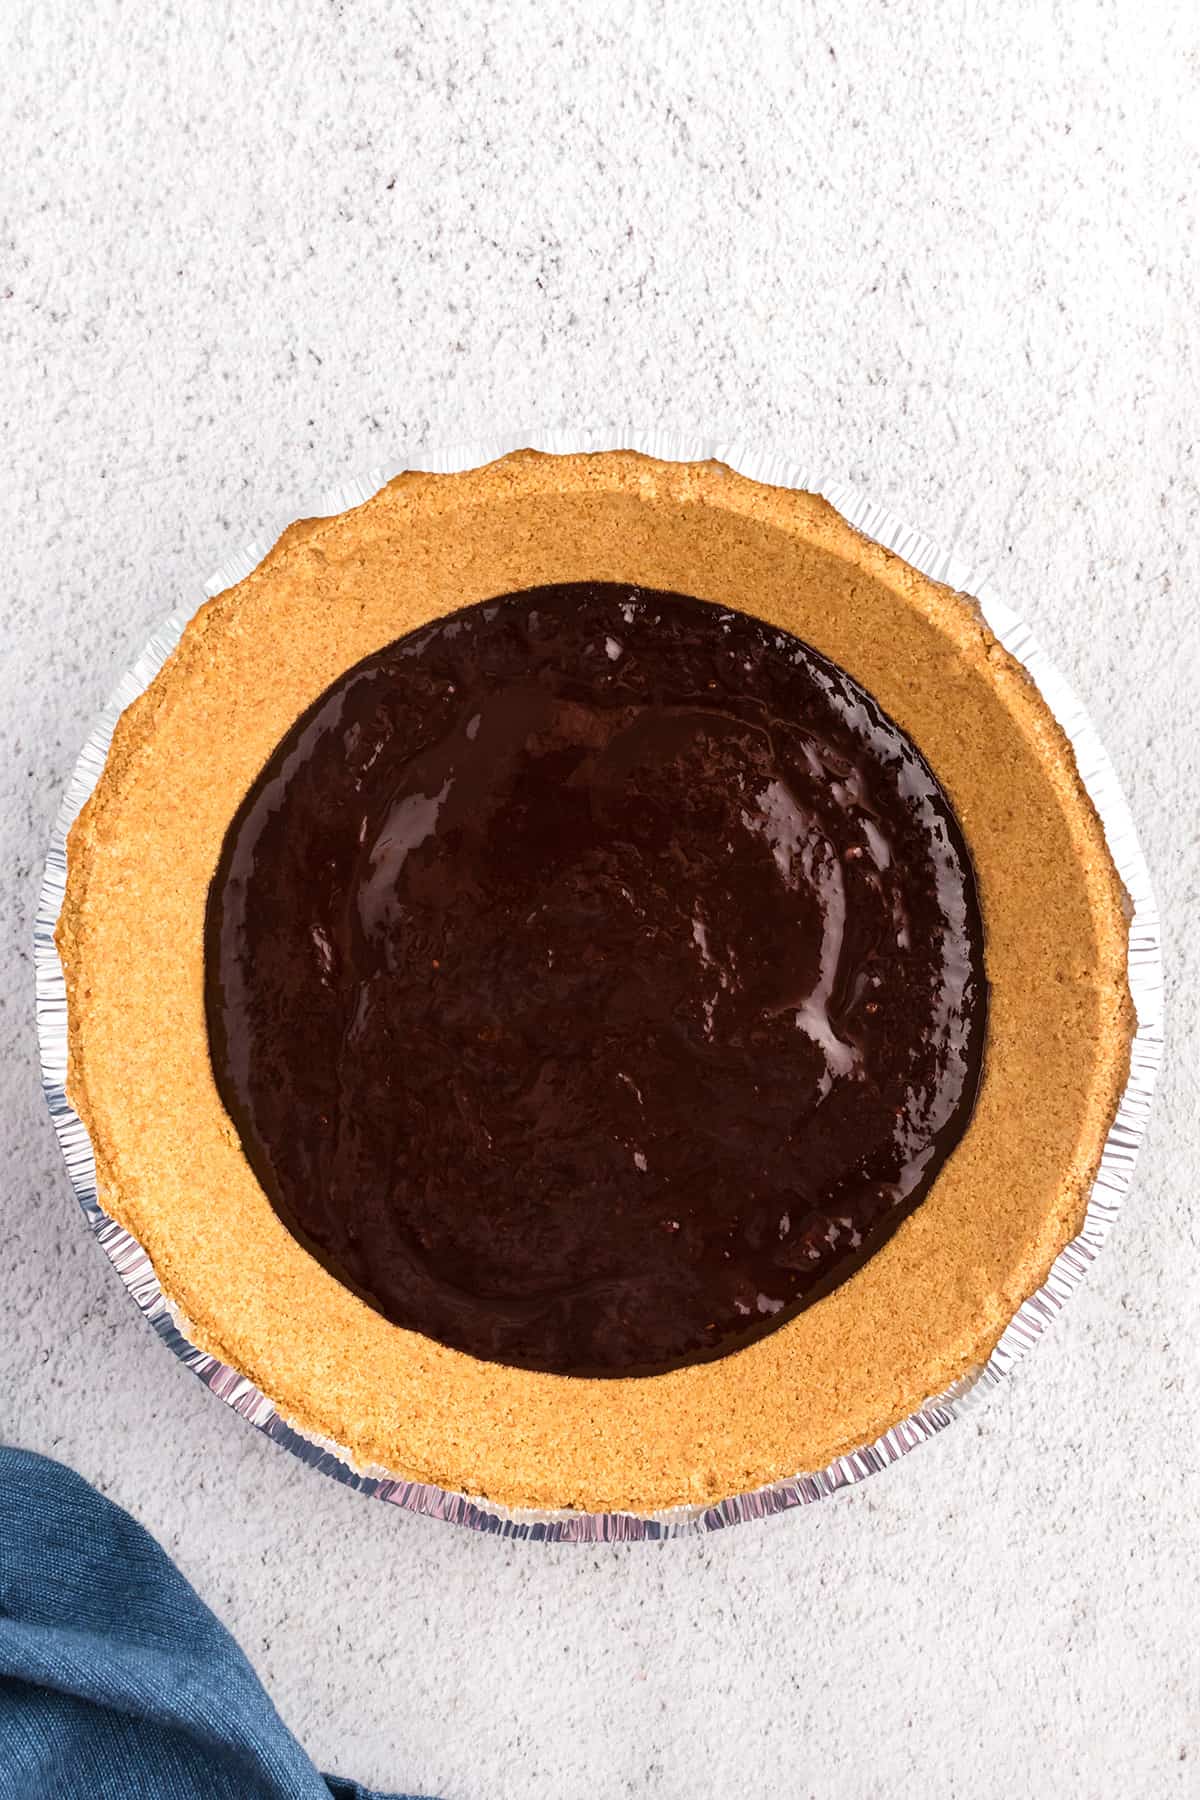 Melted chocolate spread onto bottom of a pie crust.